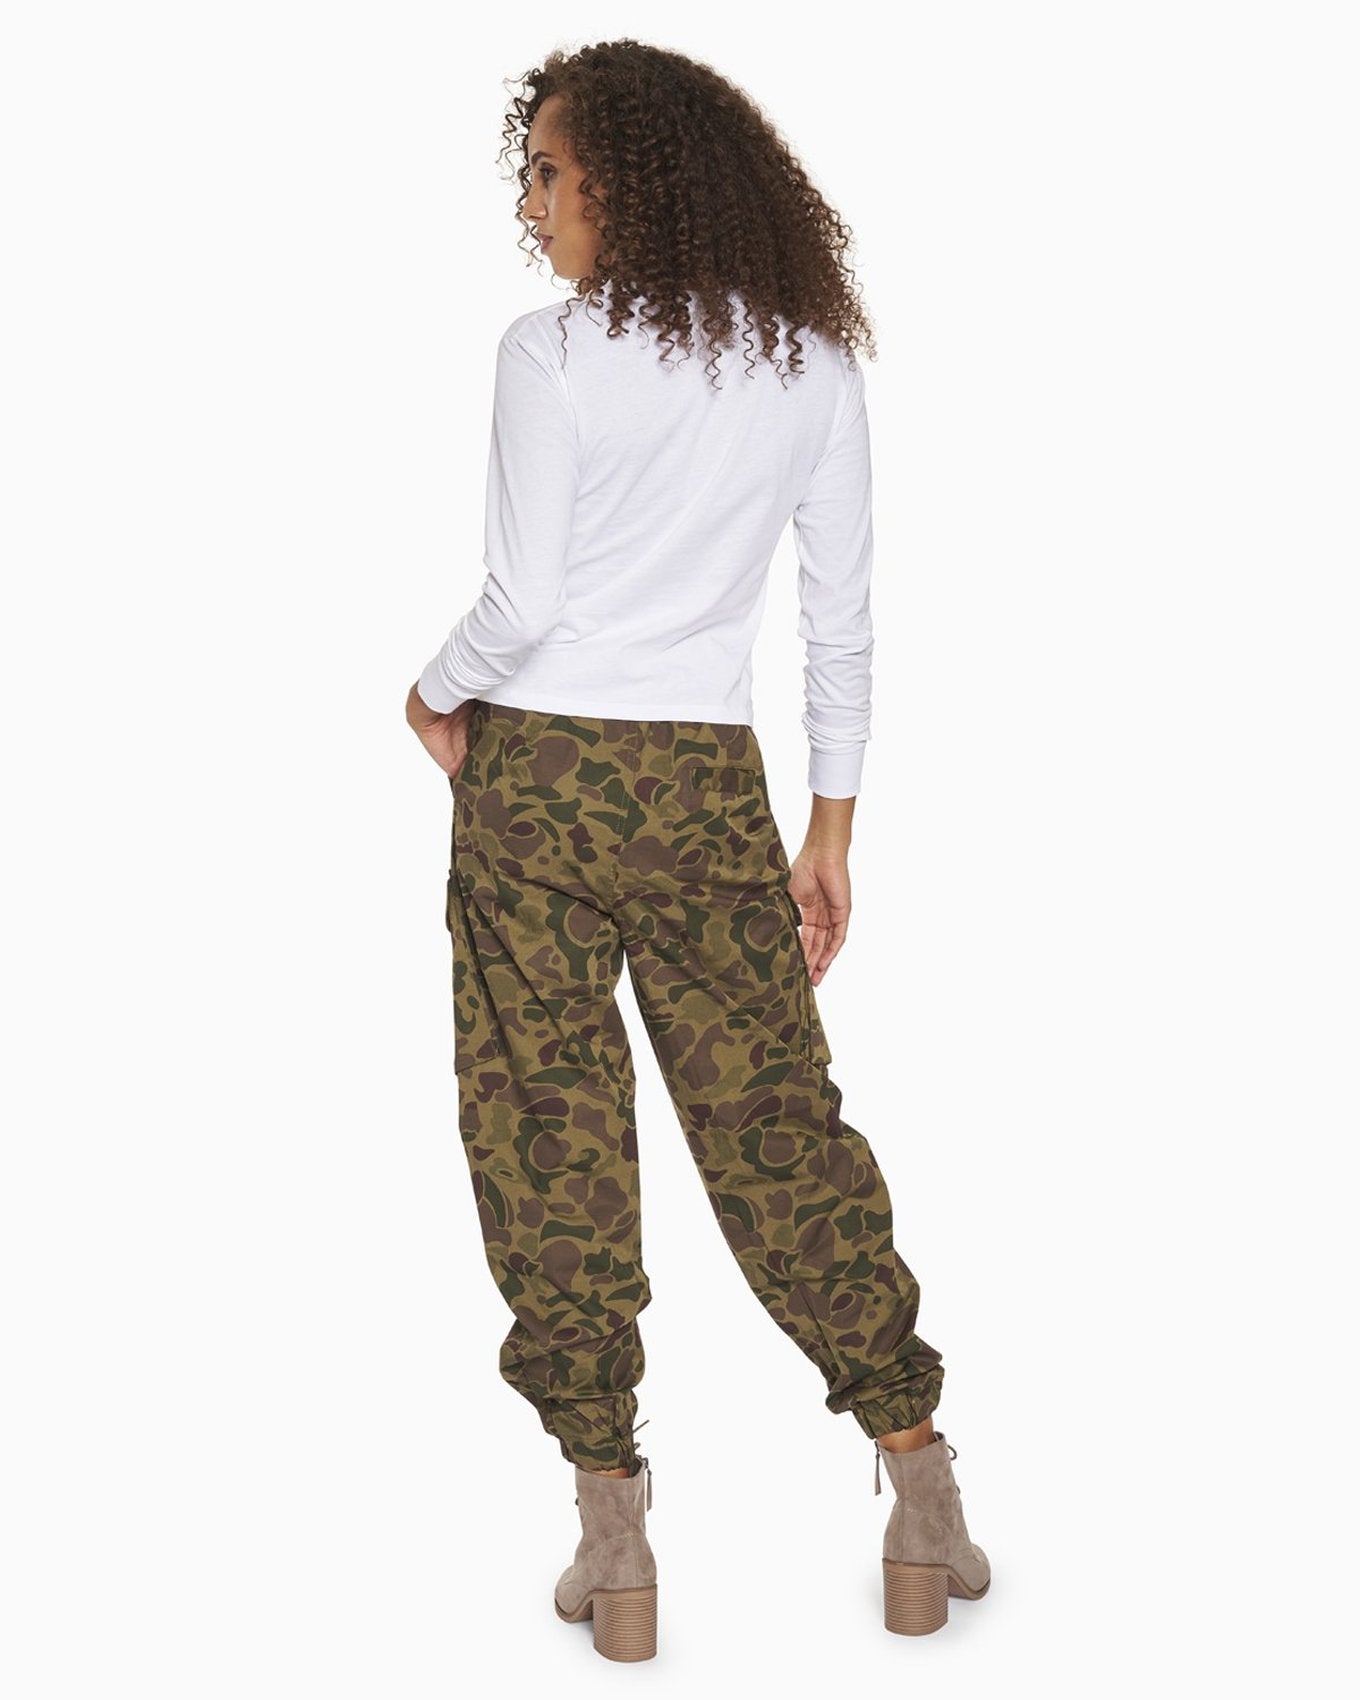 YesAnd Organic Print Utility Jogger Jogger in color Romantic Camo and shape jogger/sweatpant